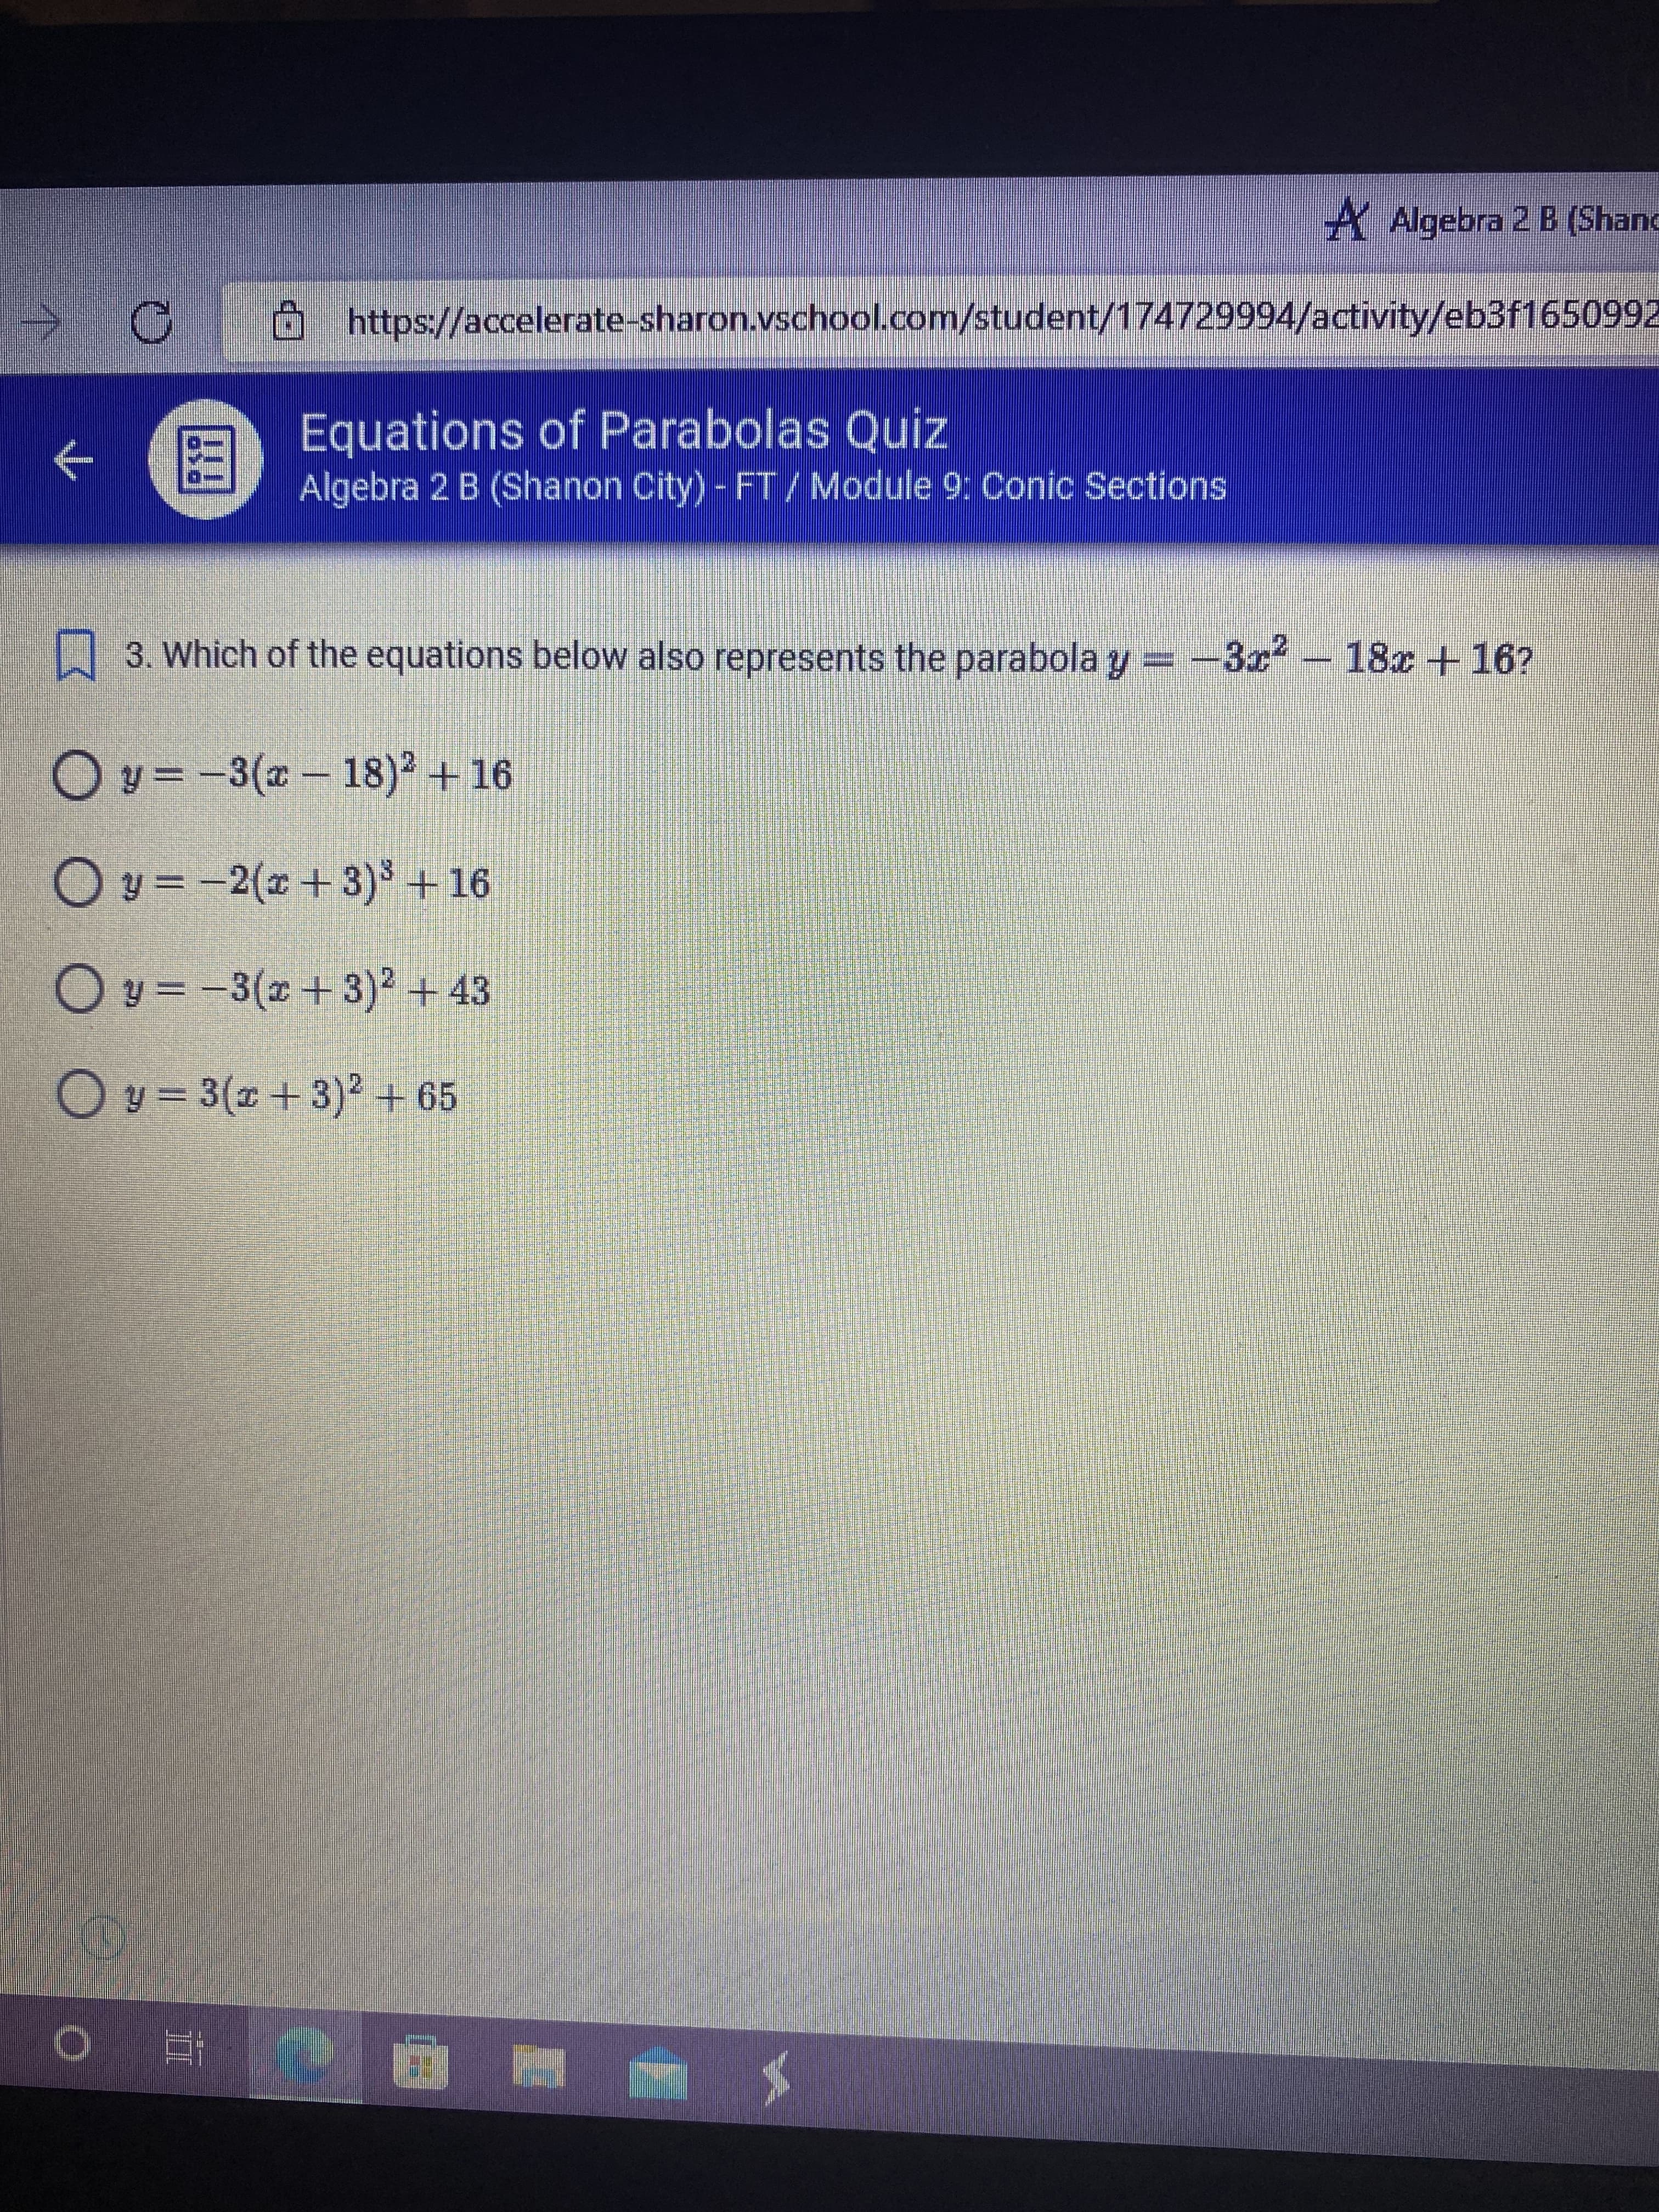 A Algebra 2 B (Shand
https://accelerate-sharon.vschool.com/student/174729994/activity/eb3f1650992
Equations of Parabolas Quiz
←
Algebra 2 B (Shanon City) - FT/ Module 9: Conic Sections
3. Which of the equations below also represents the parabola y=-3x² 18x + 16?
Oy=-3(x-18)² +16
Oy=-2(x+3)³ + 16
Oy=-3(x+3)² + 43
Oy=3(x+3)² + 65
(
O E
6
C
DO